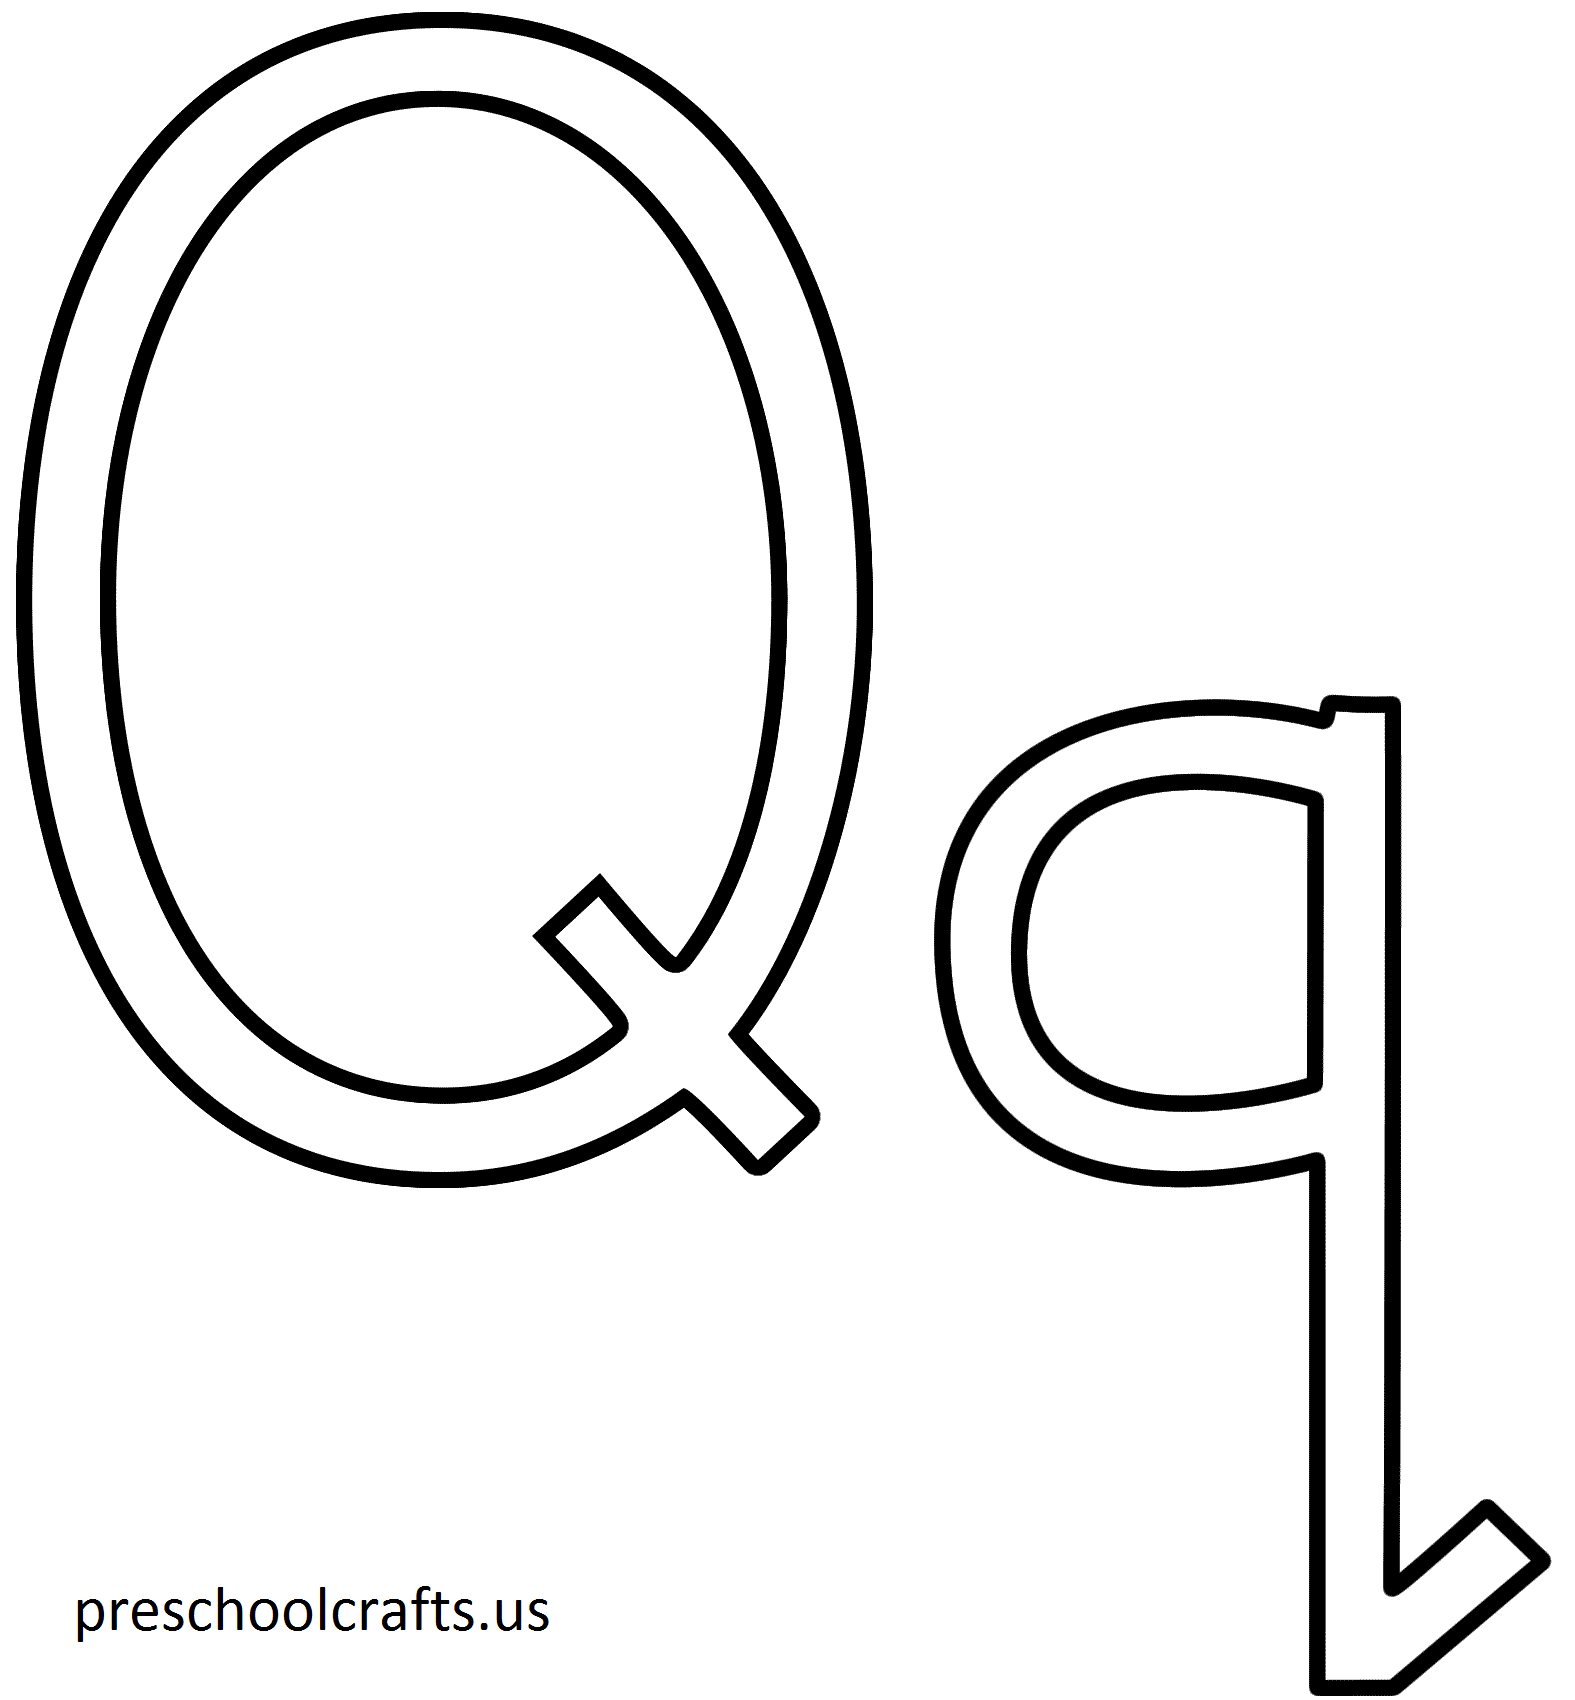 letter-q coloring pages-for preschool, - Preschool Crafts